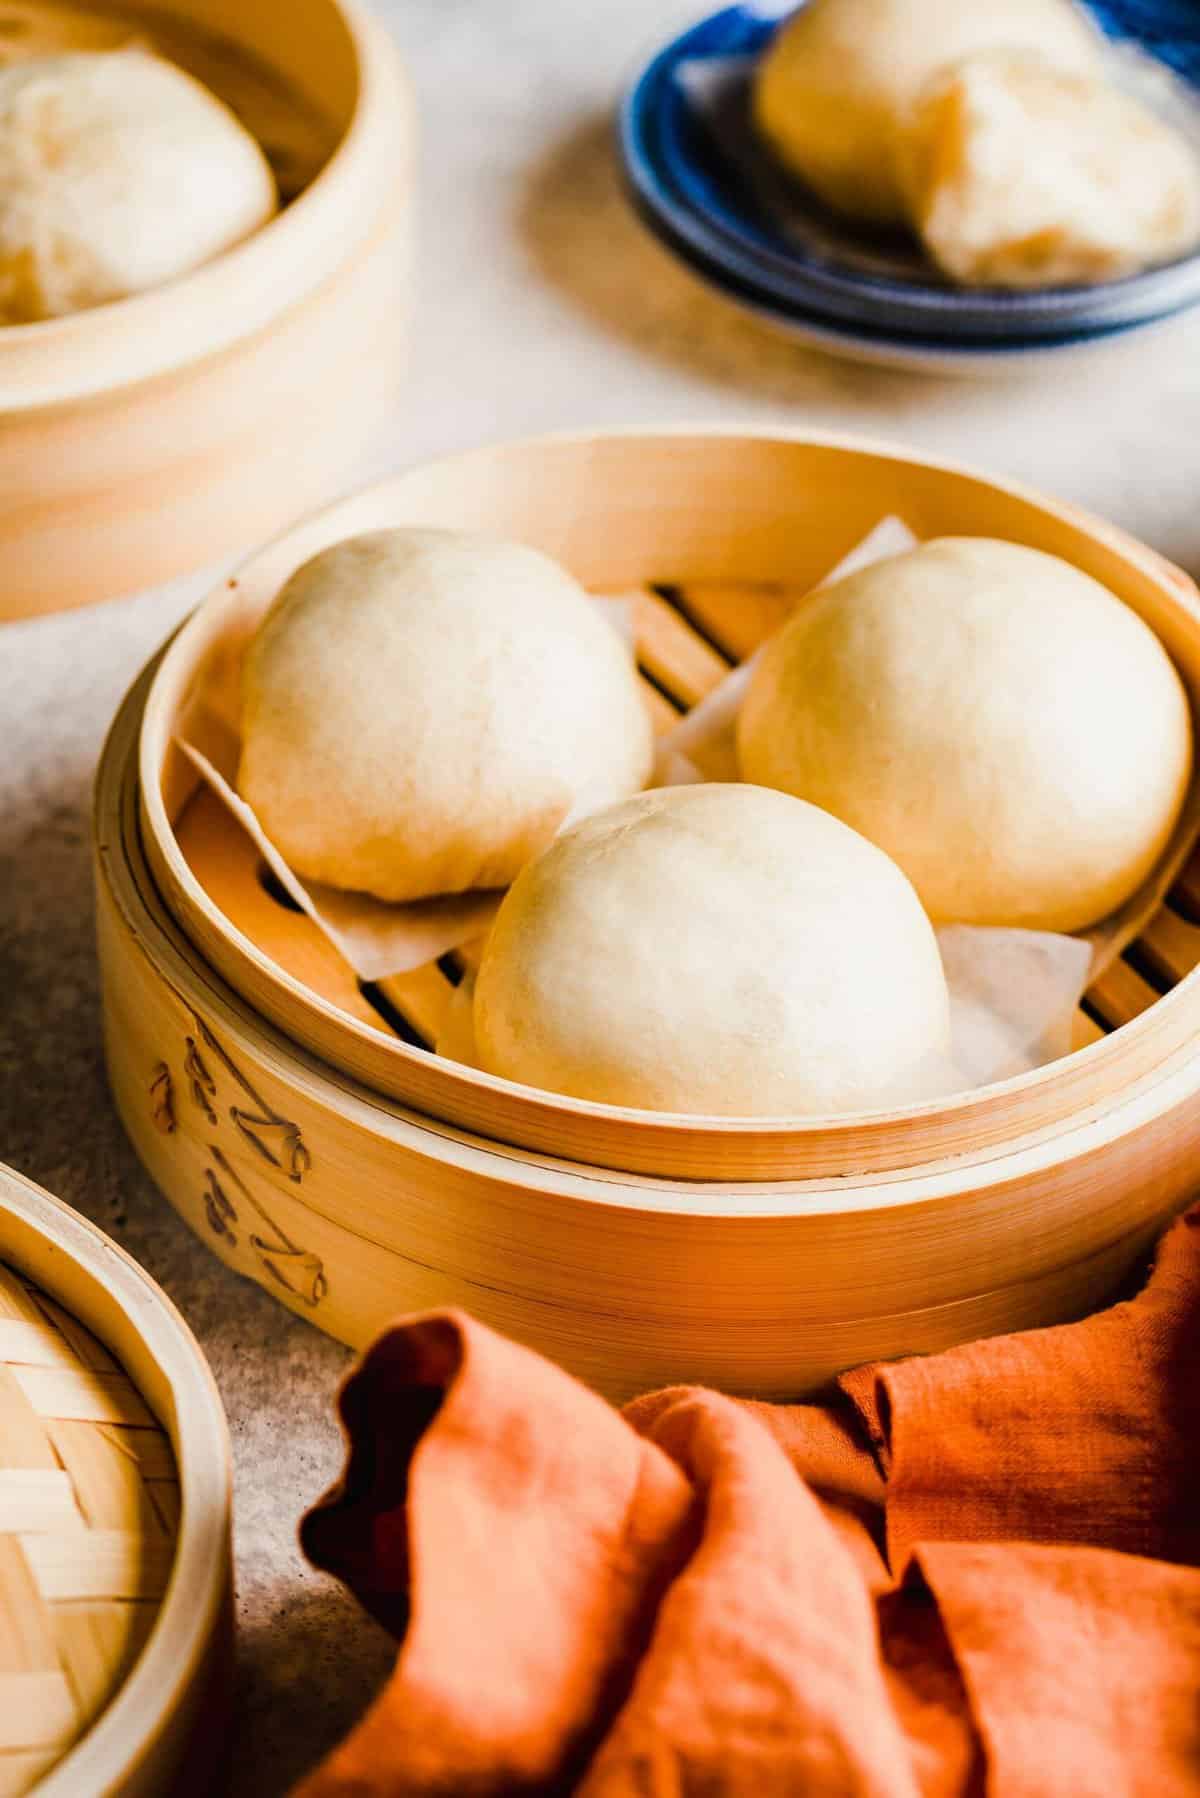 A steamer with three Chinese steamed buns in it, with another steamer of buns in the background, a plate with a steamed bun on it in the background, and a napkin in the foreground.